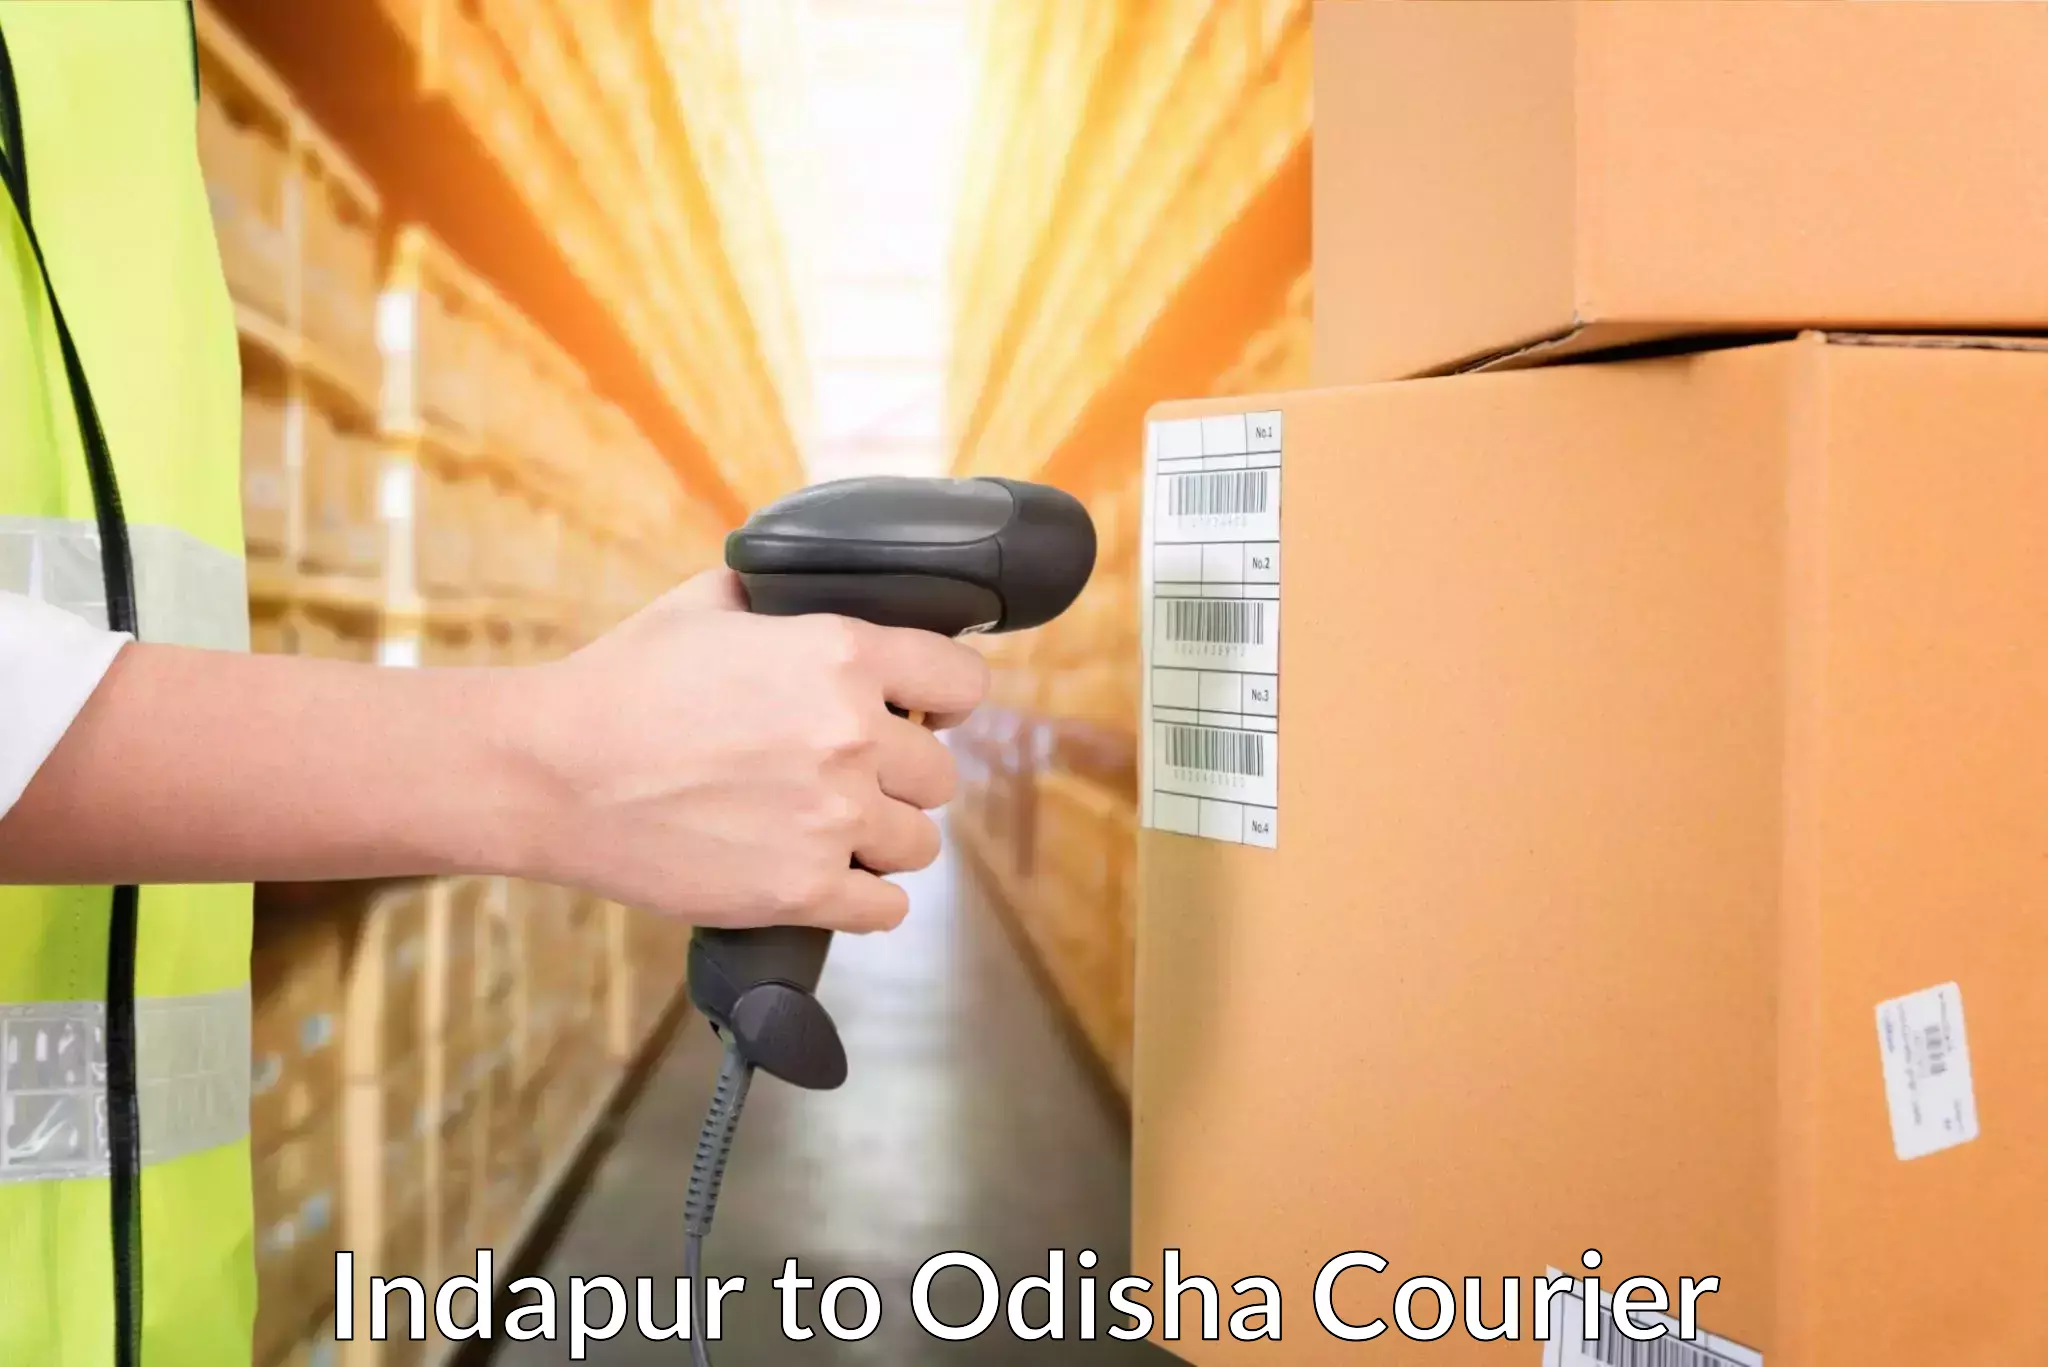 Fast delivery service in Indapur to Bhadrak